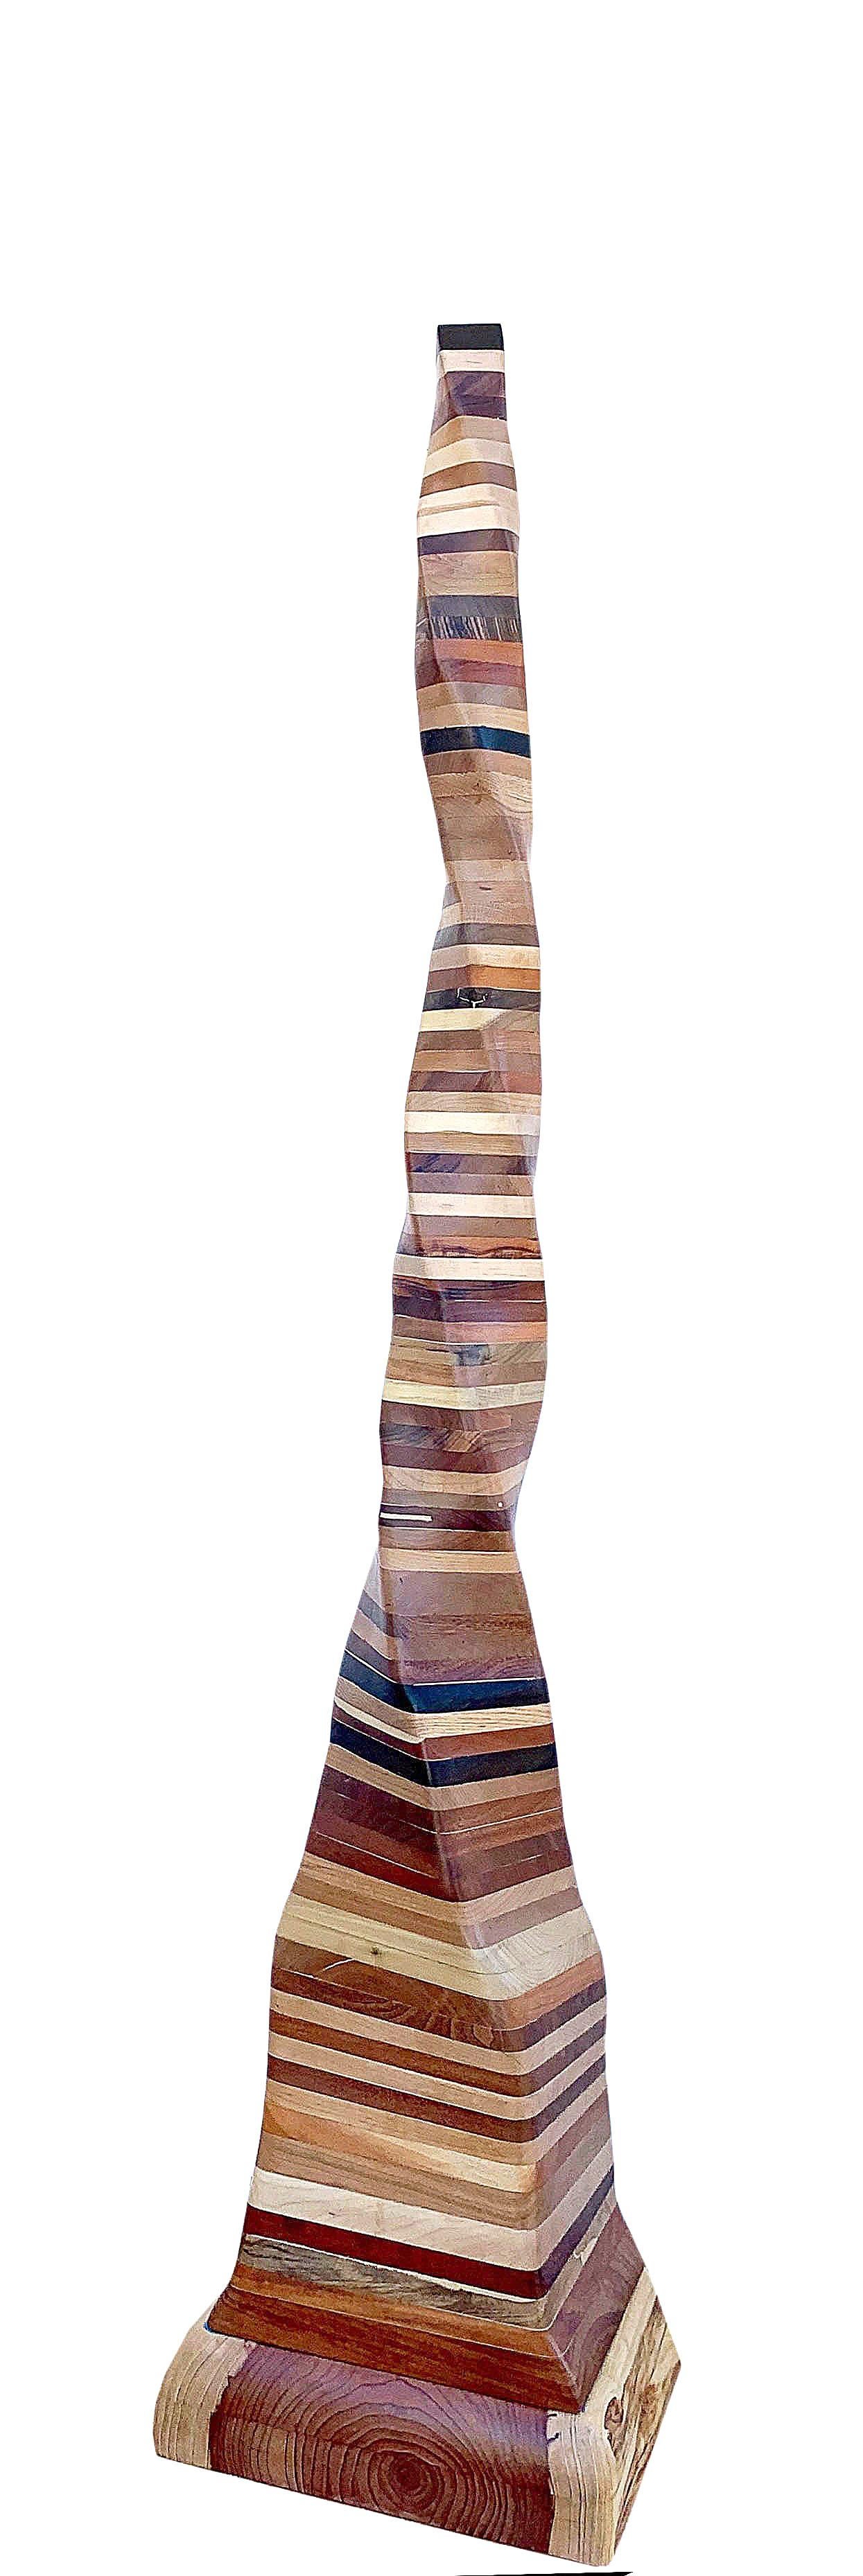 Original and one-of-a-kind creation by San Diego artist, Ben Darby.  This undulating sculpture is made of various woods and may be viewed from multiple angles. Darby's creativity and enthusiasm makes us even more excited to make this sculpture and